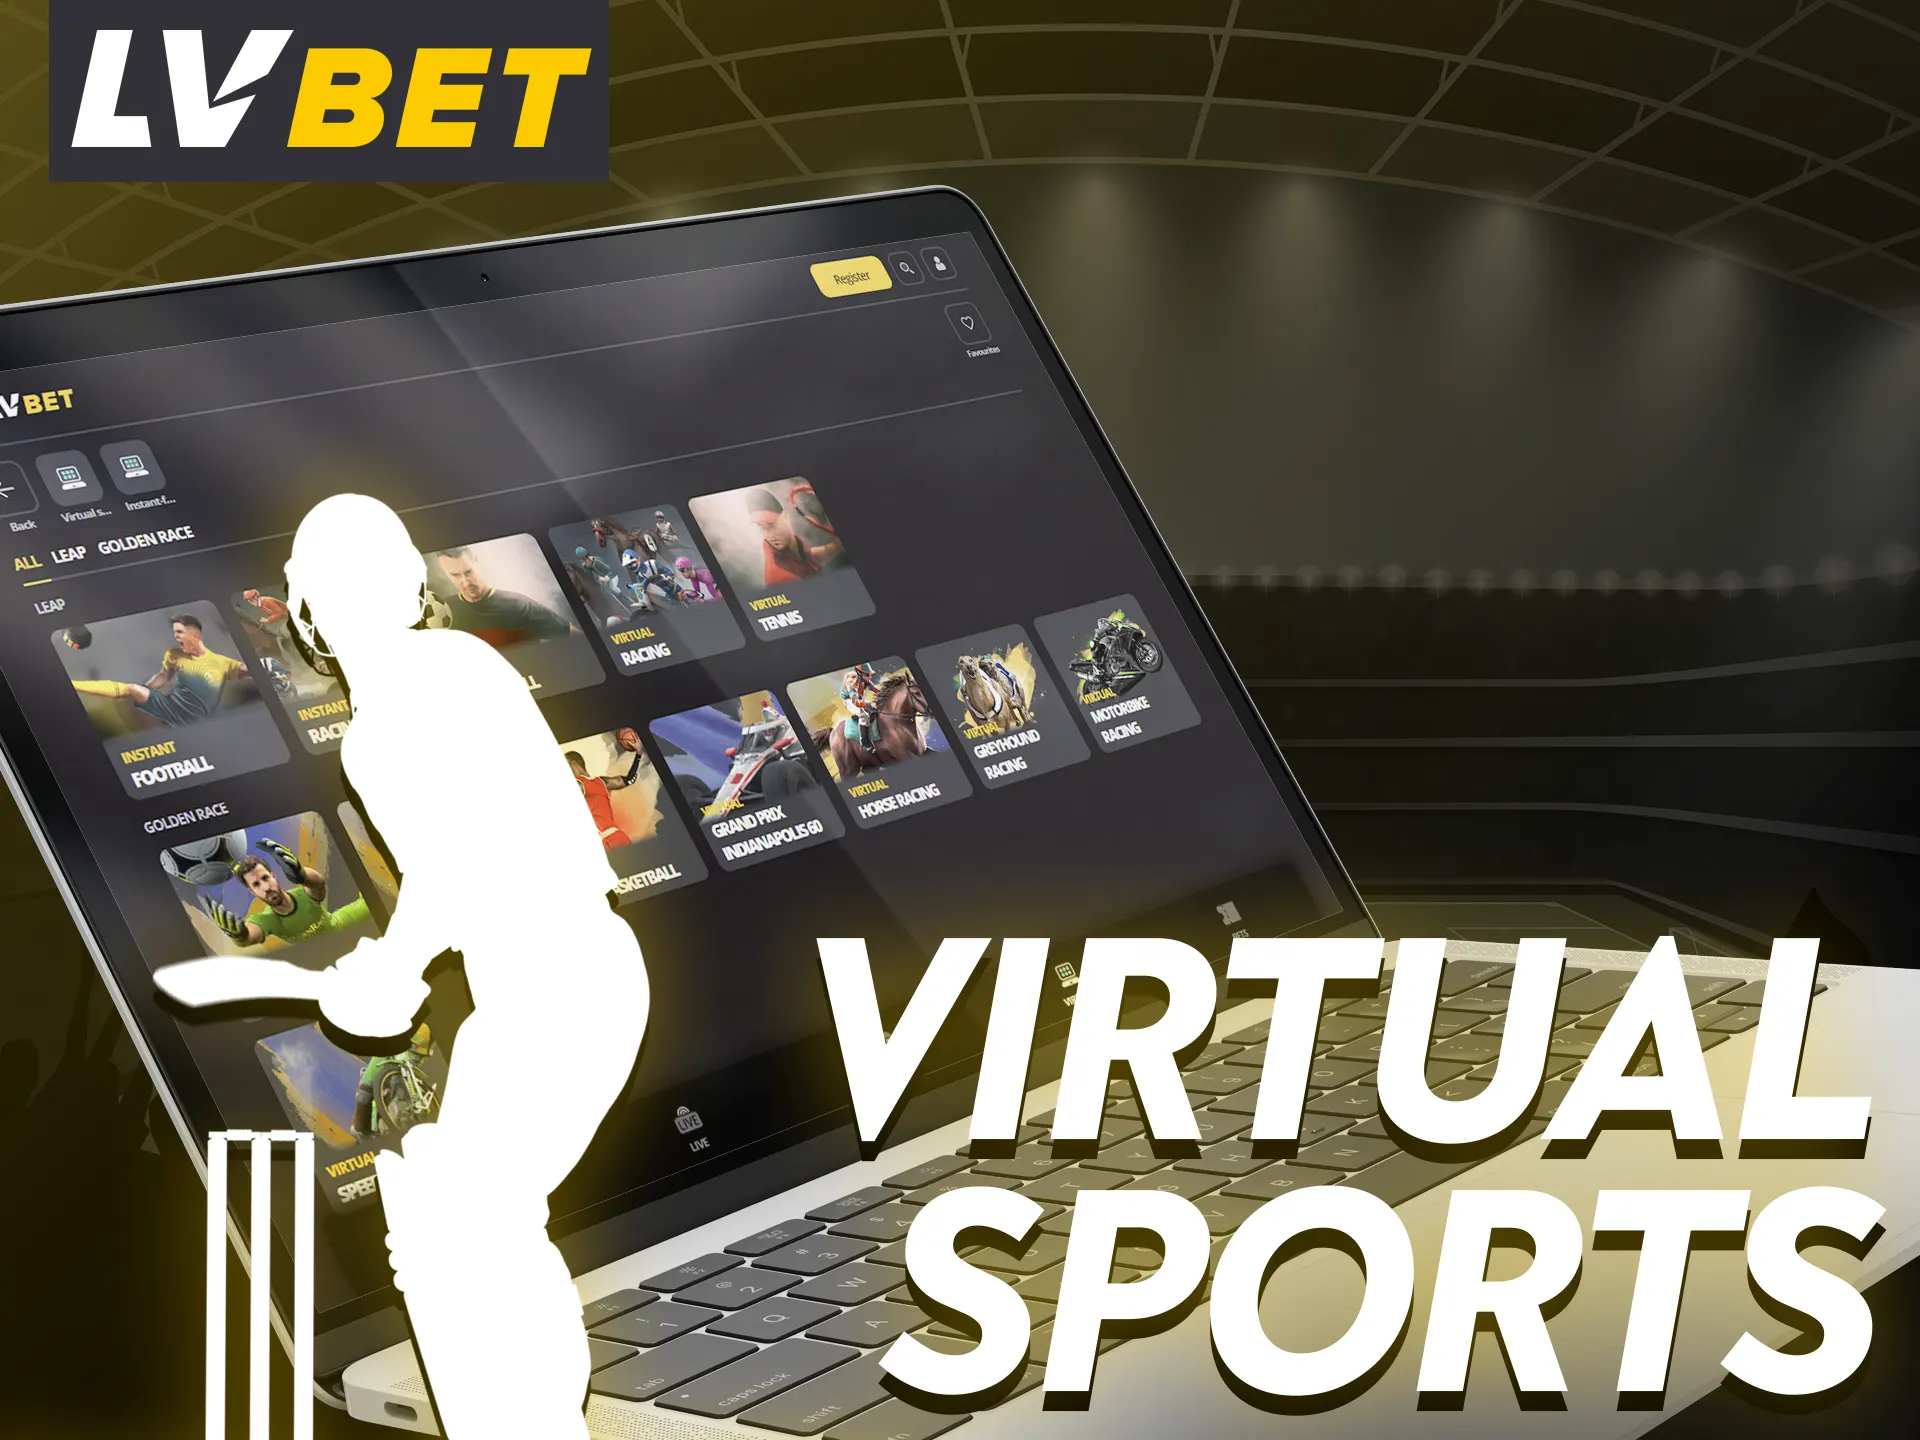 Bet on virutal sports with LV Bet.